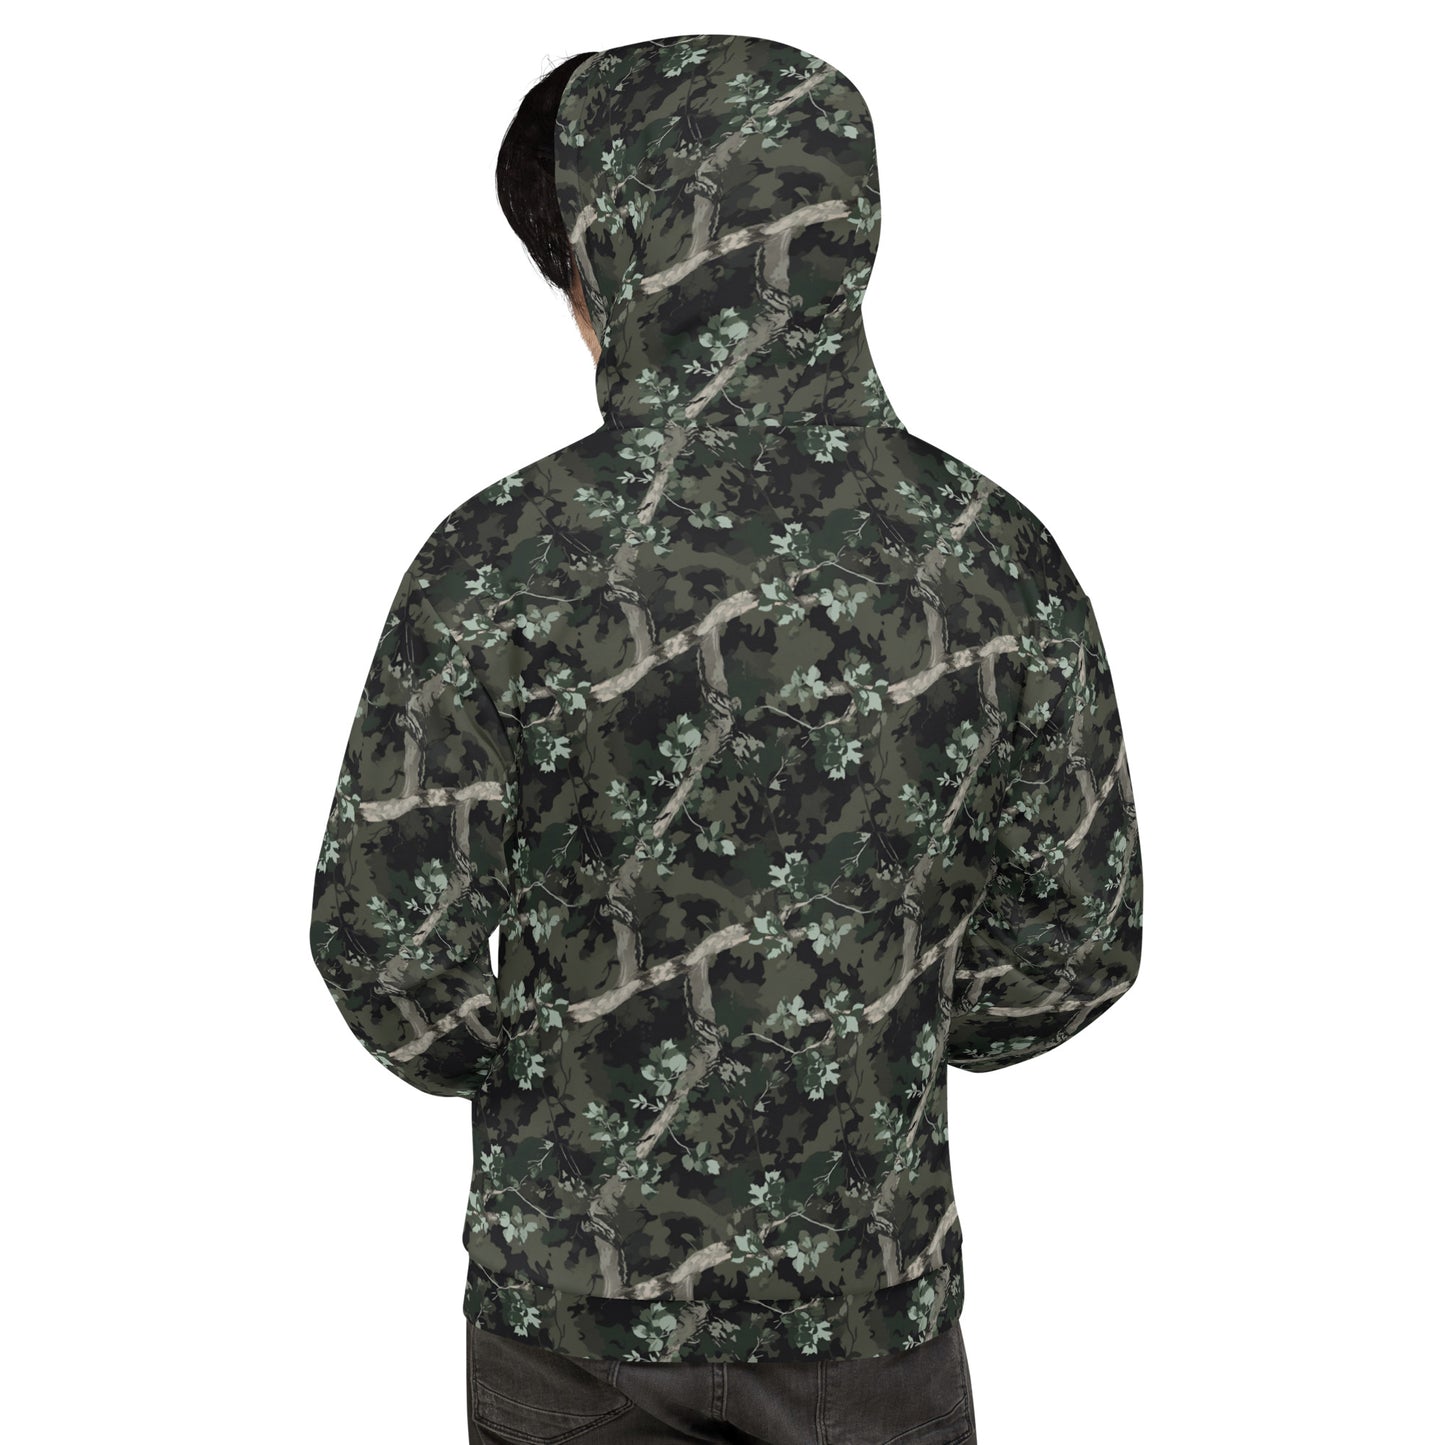 Green Camouflage Hoodie, Camo Leaf Tree Bark Pullover Men Women Adult Aesthetic Graphic Hooded Sweatshirt with Pockets